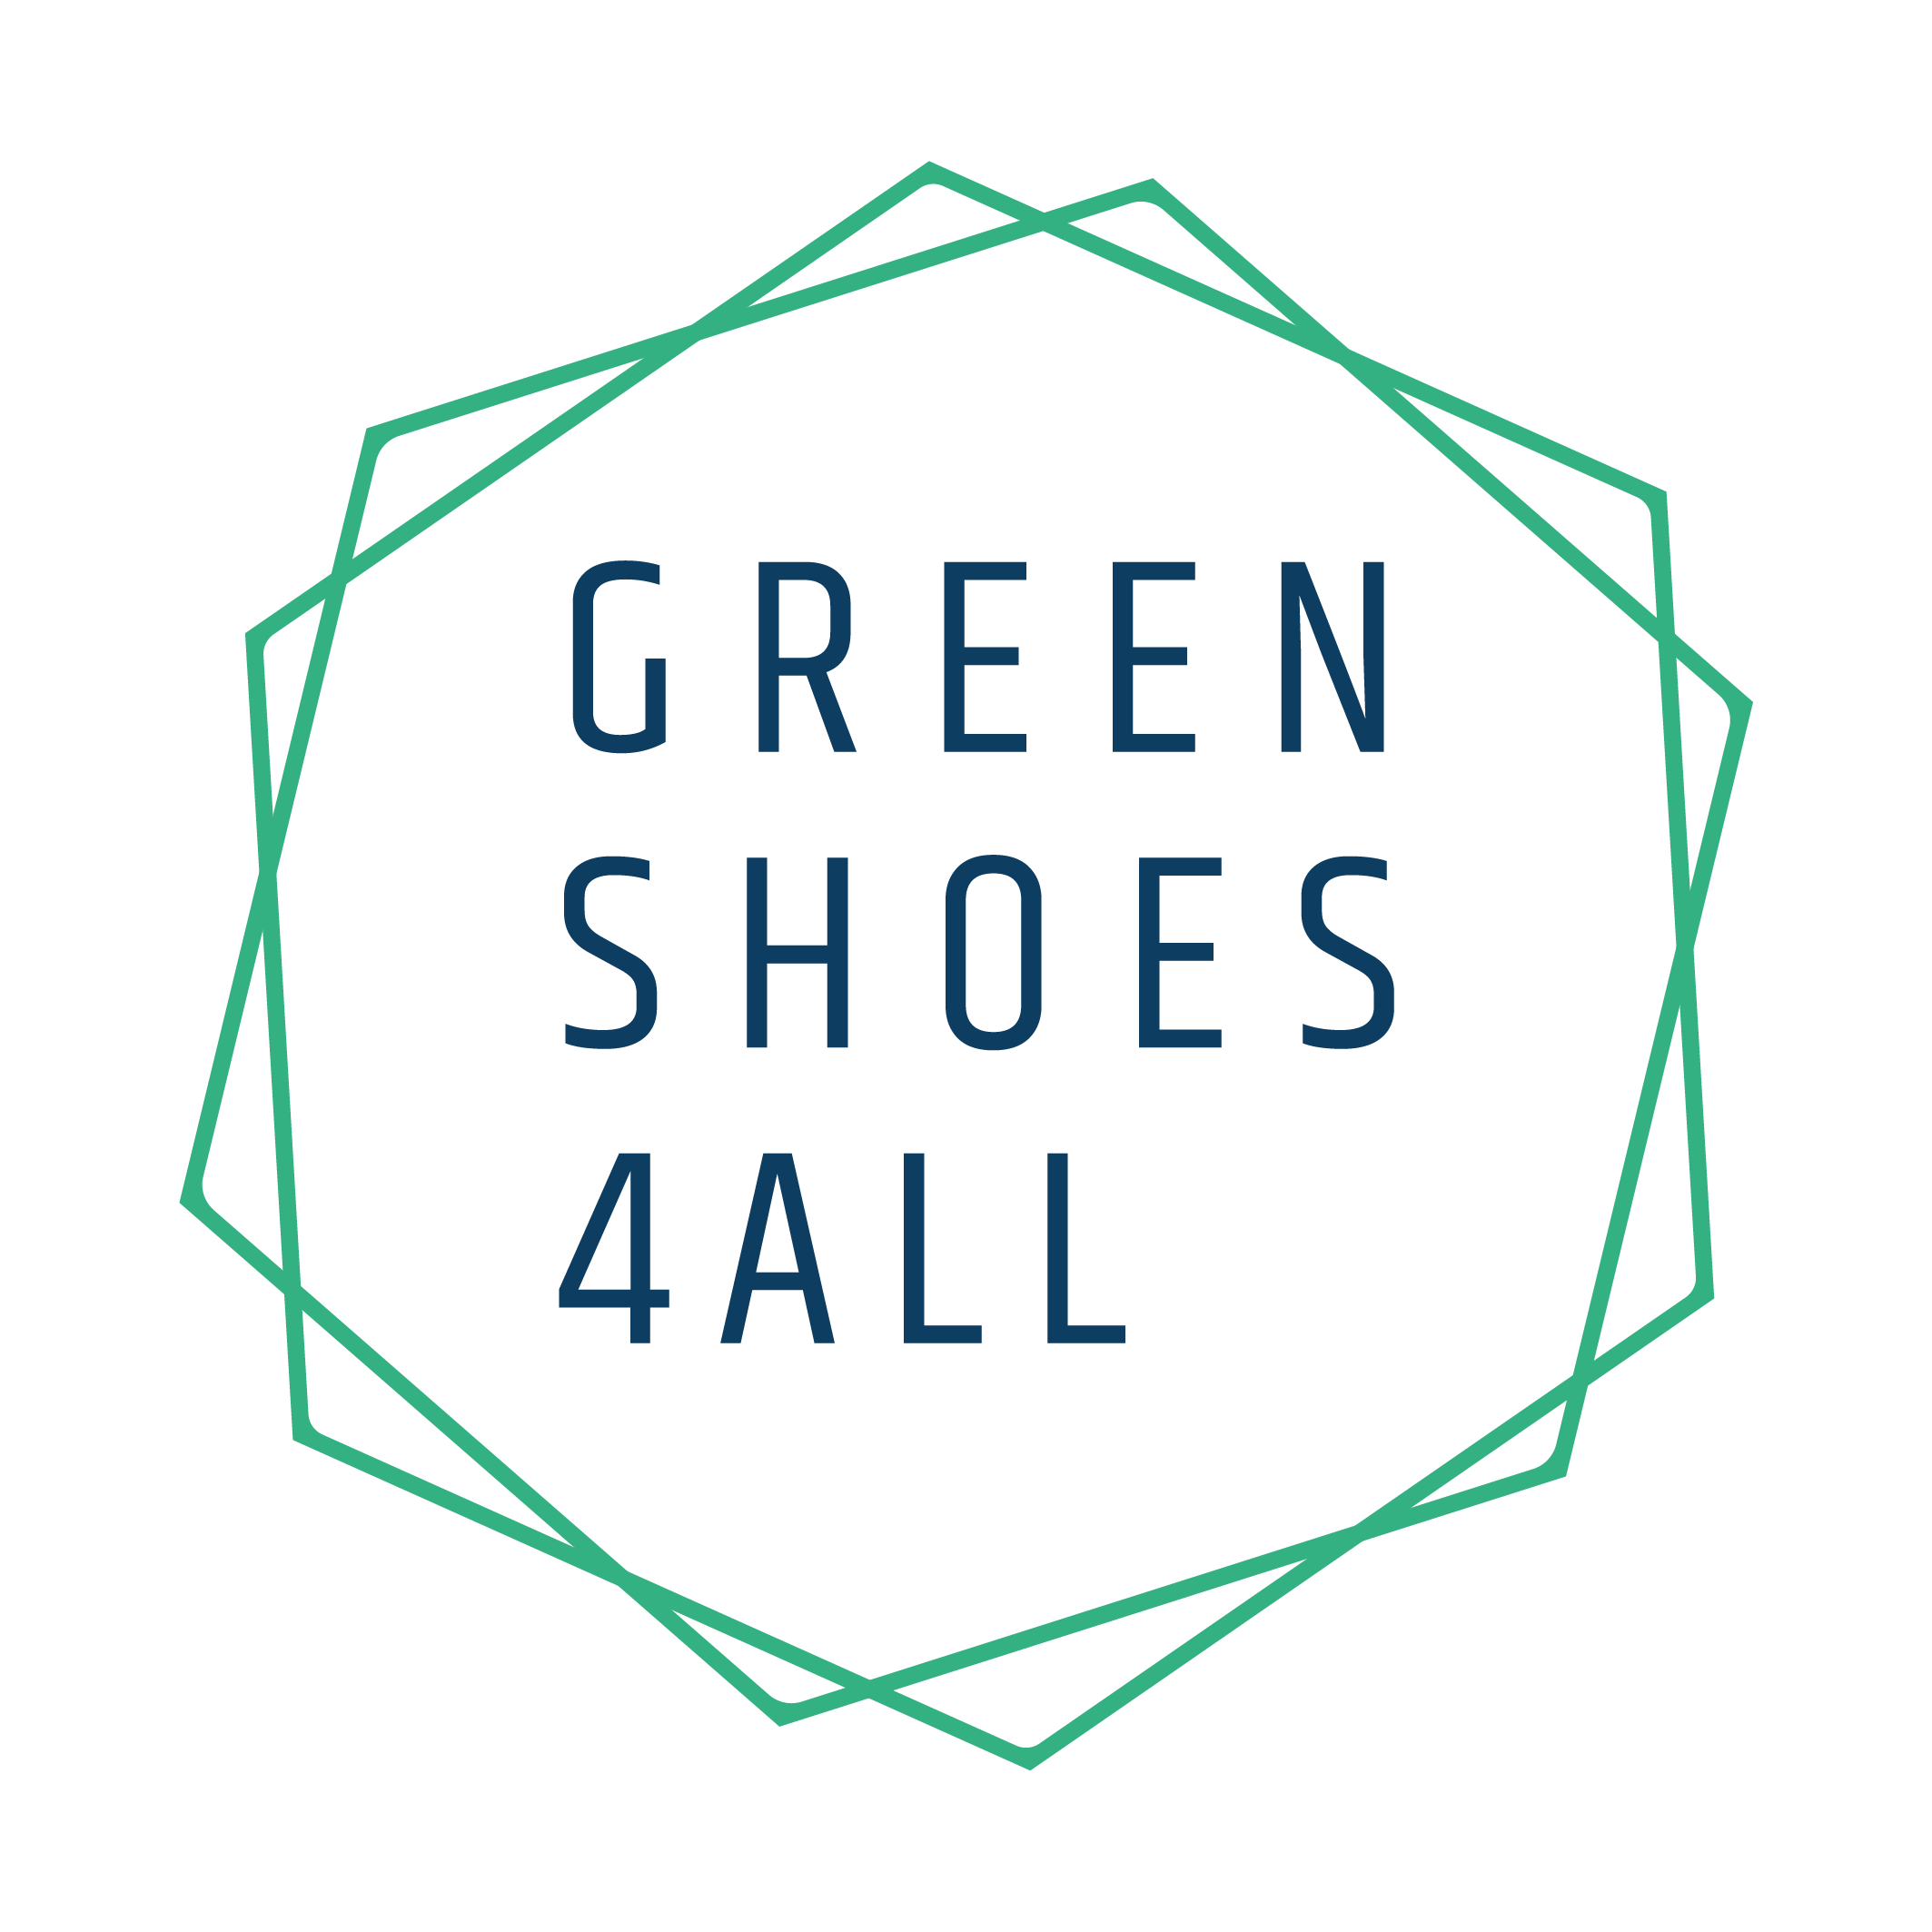 Greenshoes4all